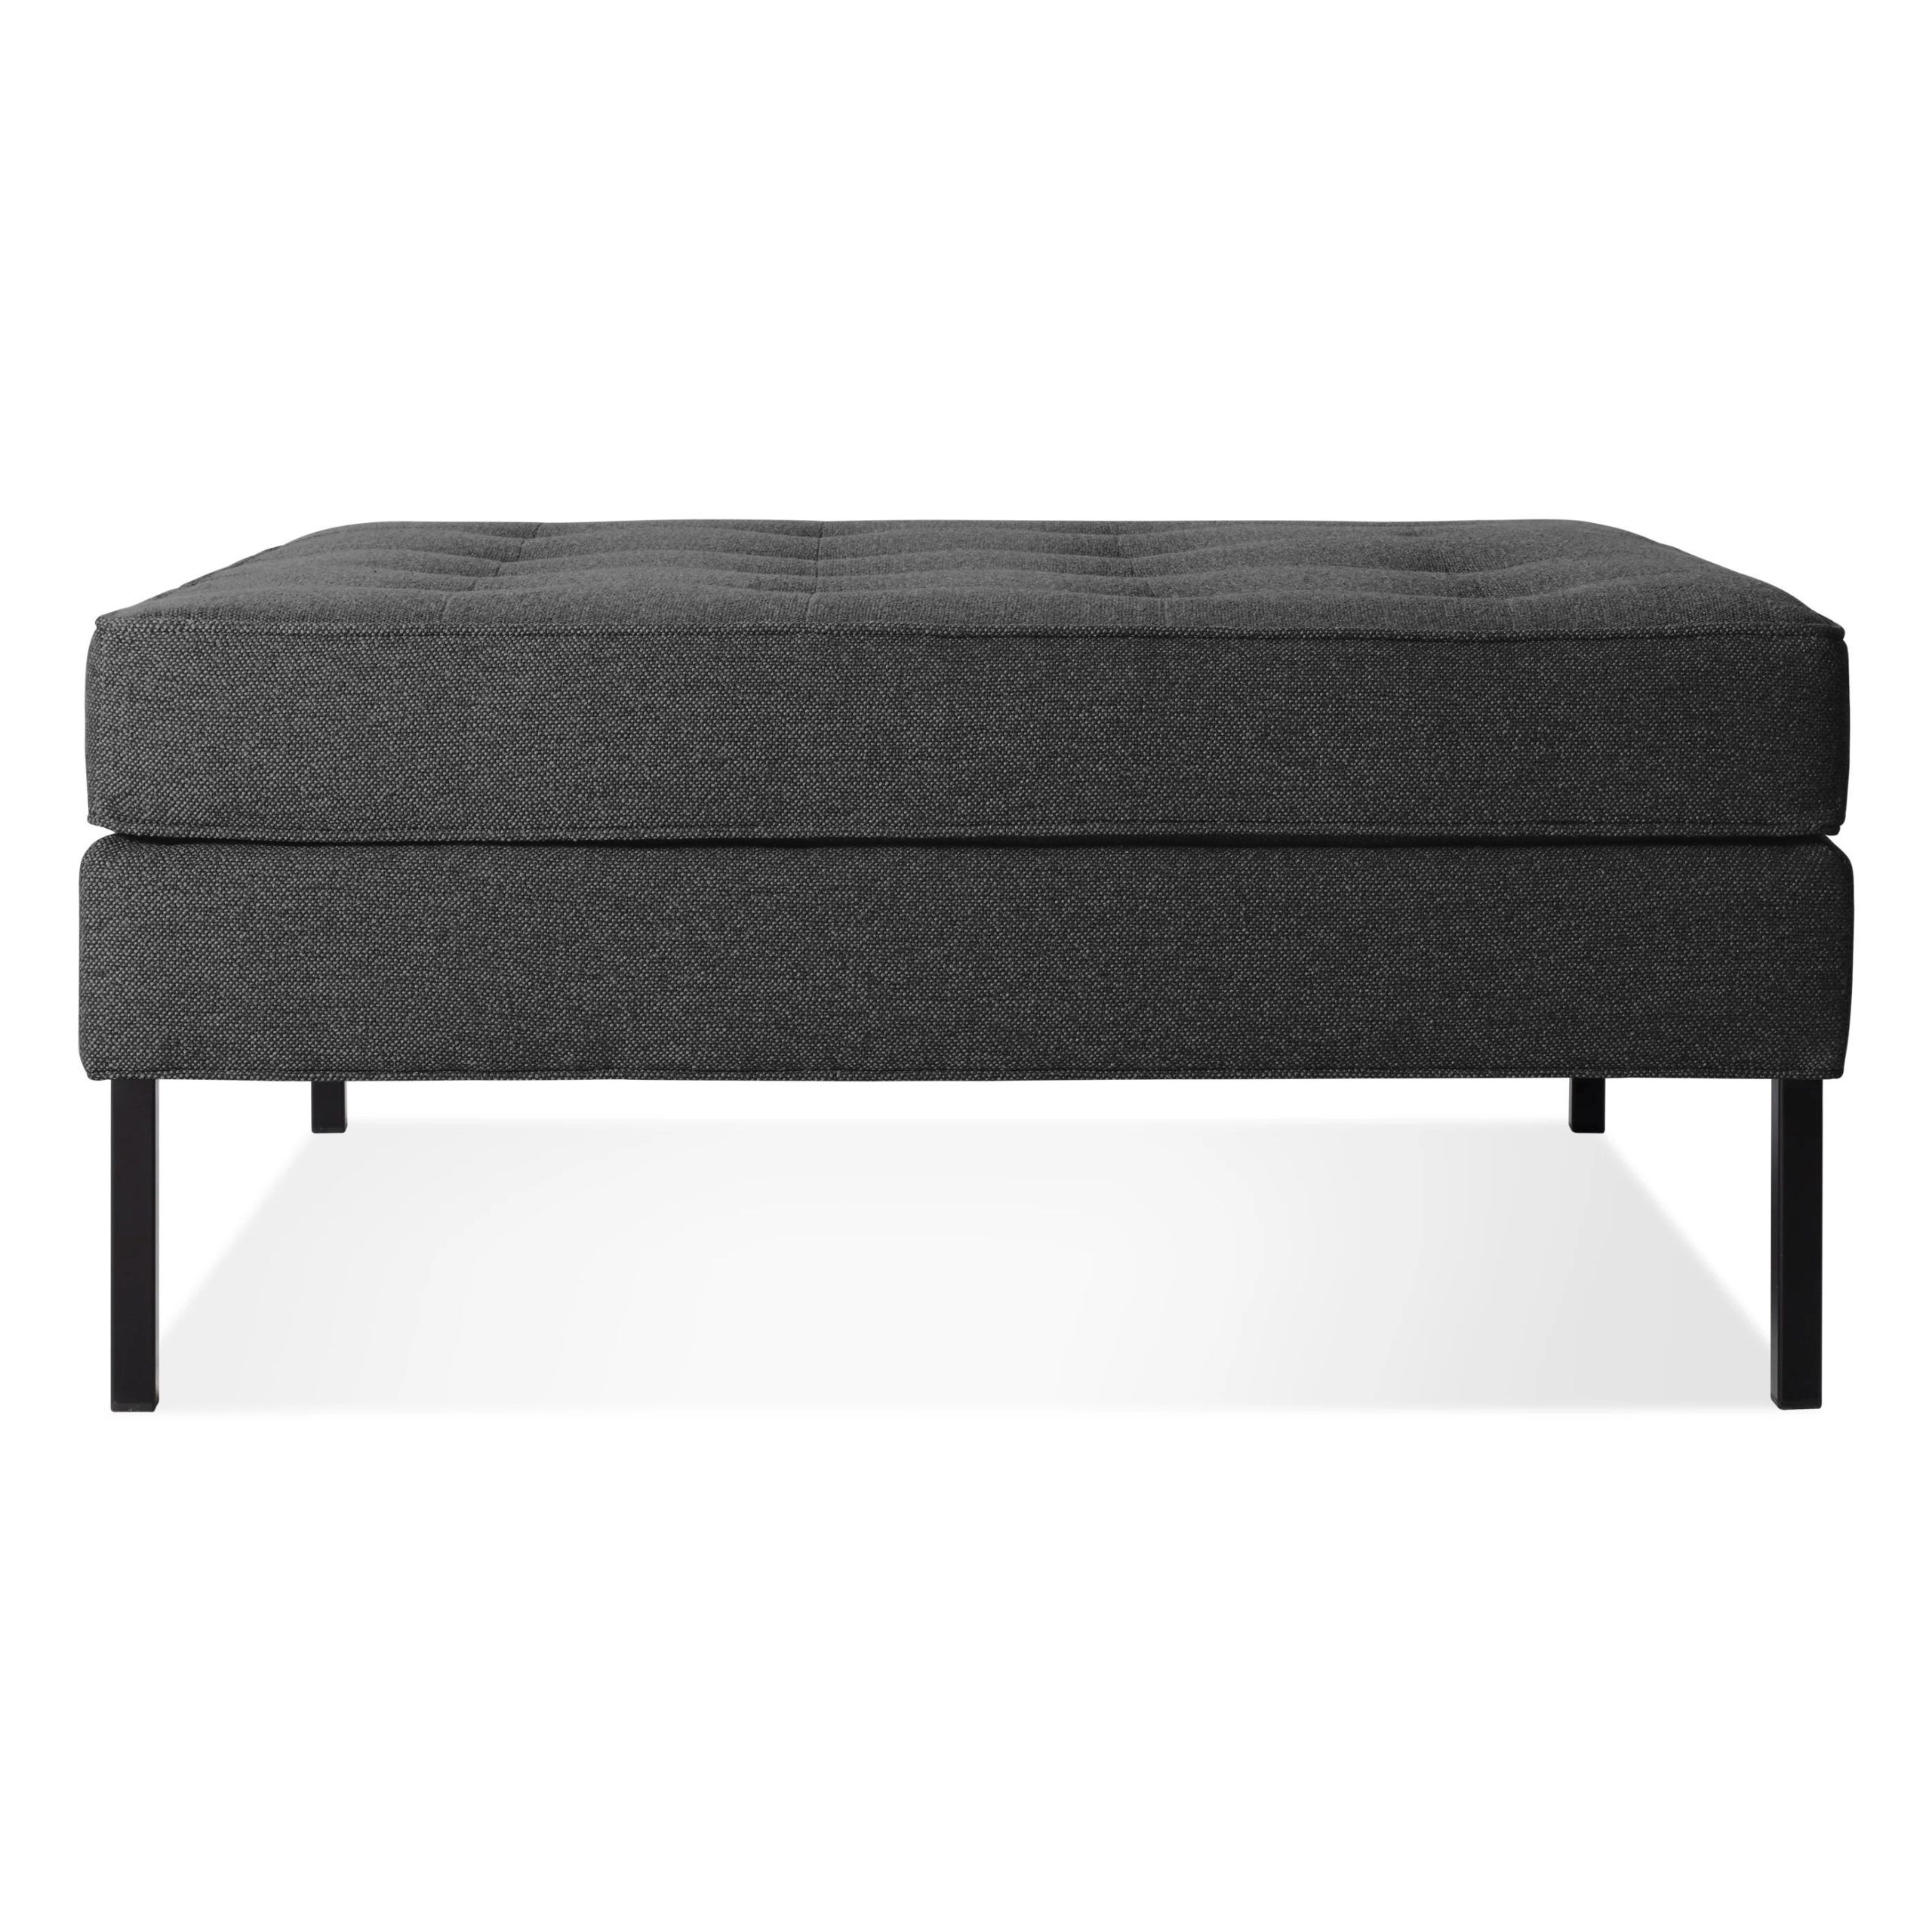 Most Current Charcoal Dot Ottomans Pertaining To Blu Dot Paramount Large Square Ottoman (View 2 of 10)